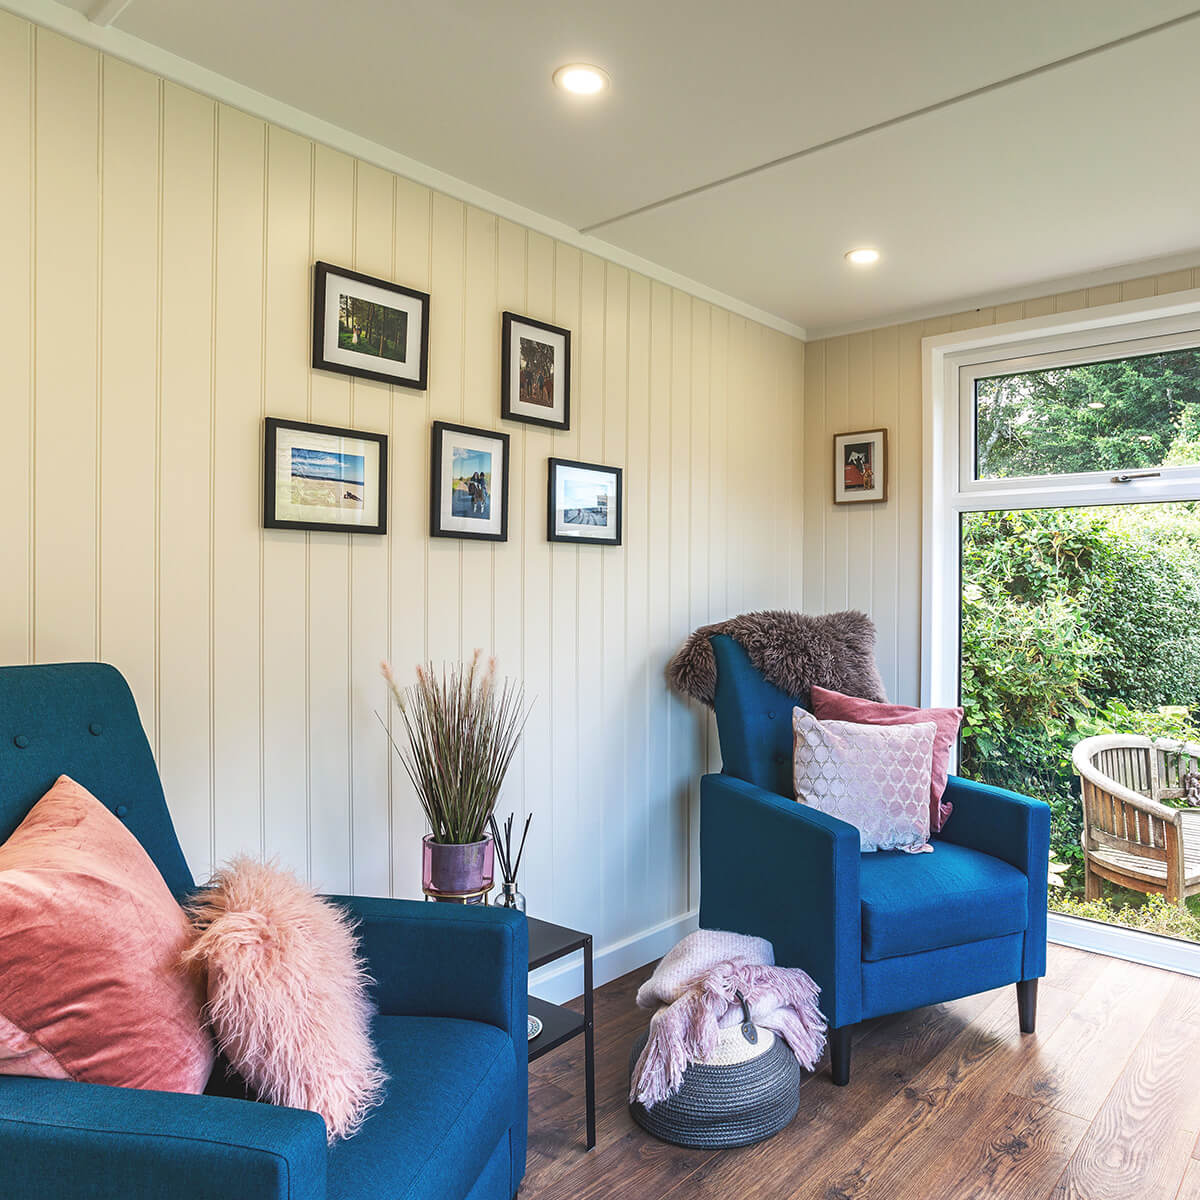 small garden room summerhouse with blue armchairs and framed pictures hanging on the wall